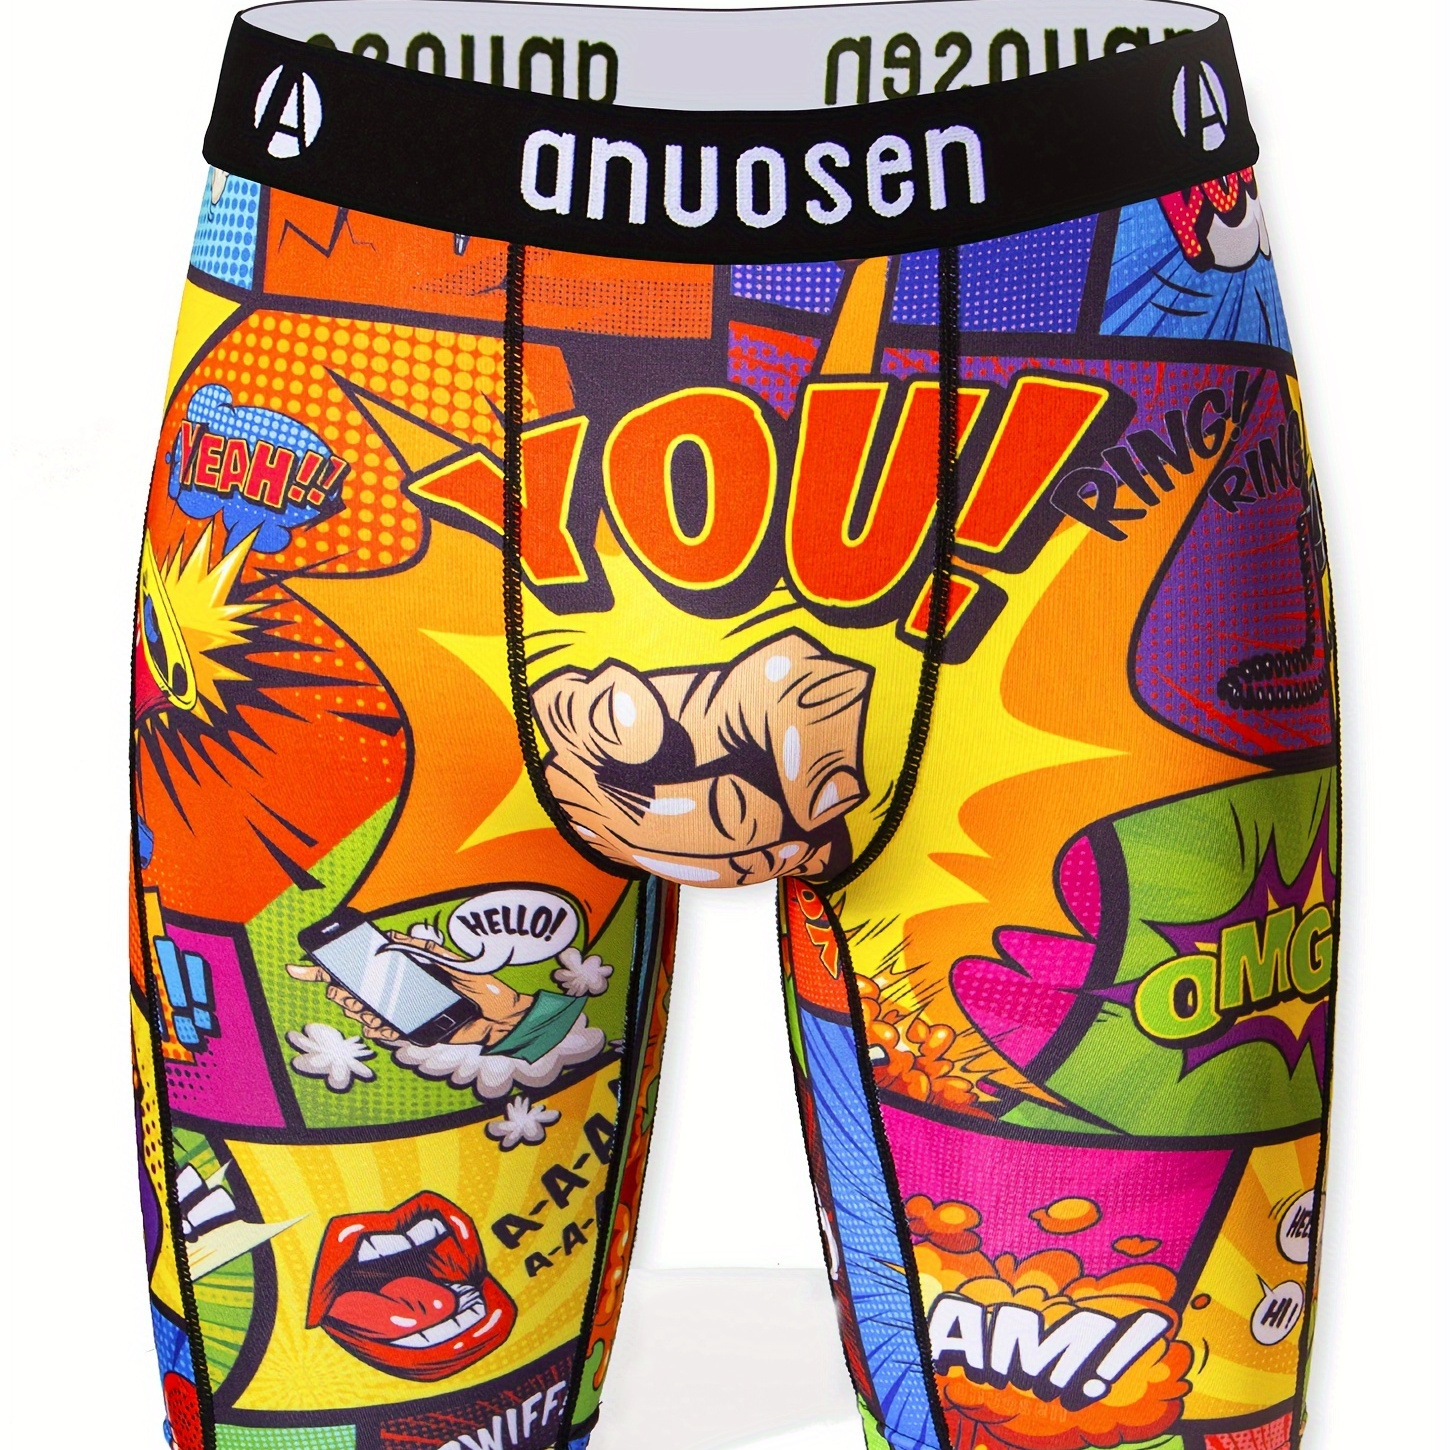 

Men's Cartoon Pattern Graphic Long Boxer Briefs Shorts, Breathable Comfy Quick Drying Stretchy Boxer Trunks, Sports Trunks, Swim Trunks For Beach Pool, Men's Novelty Underwear Men's Athletic Underwear